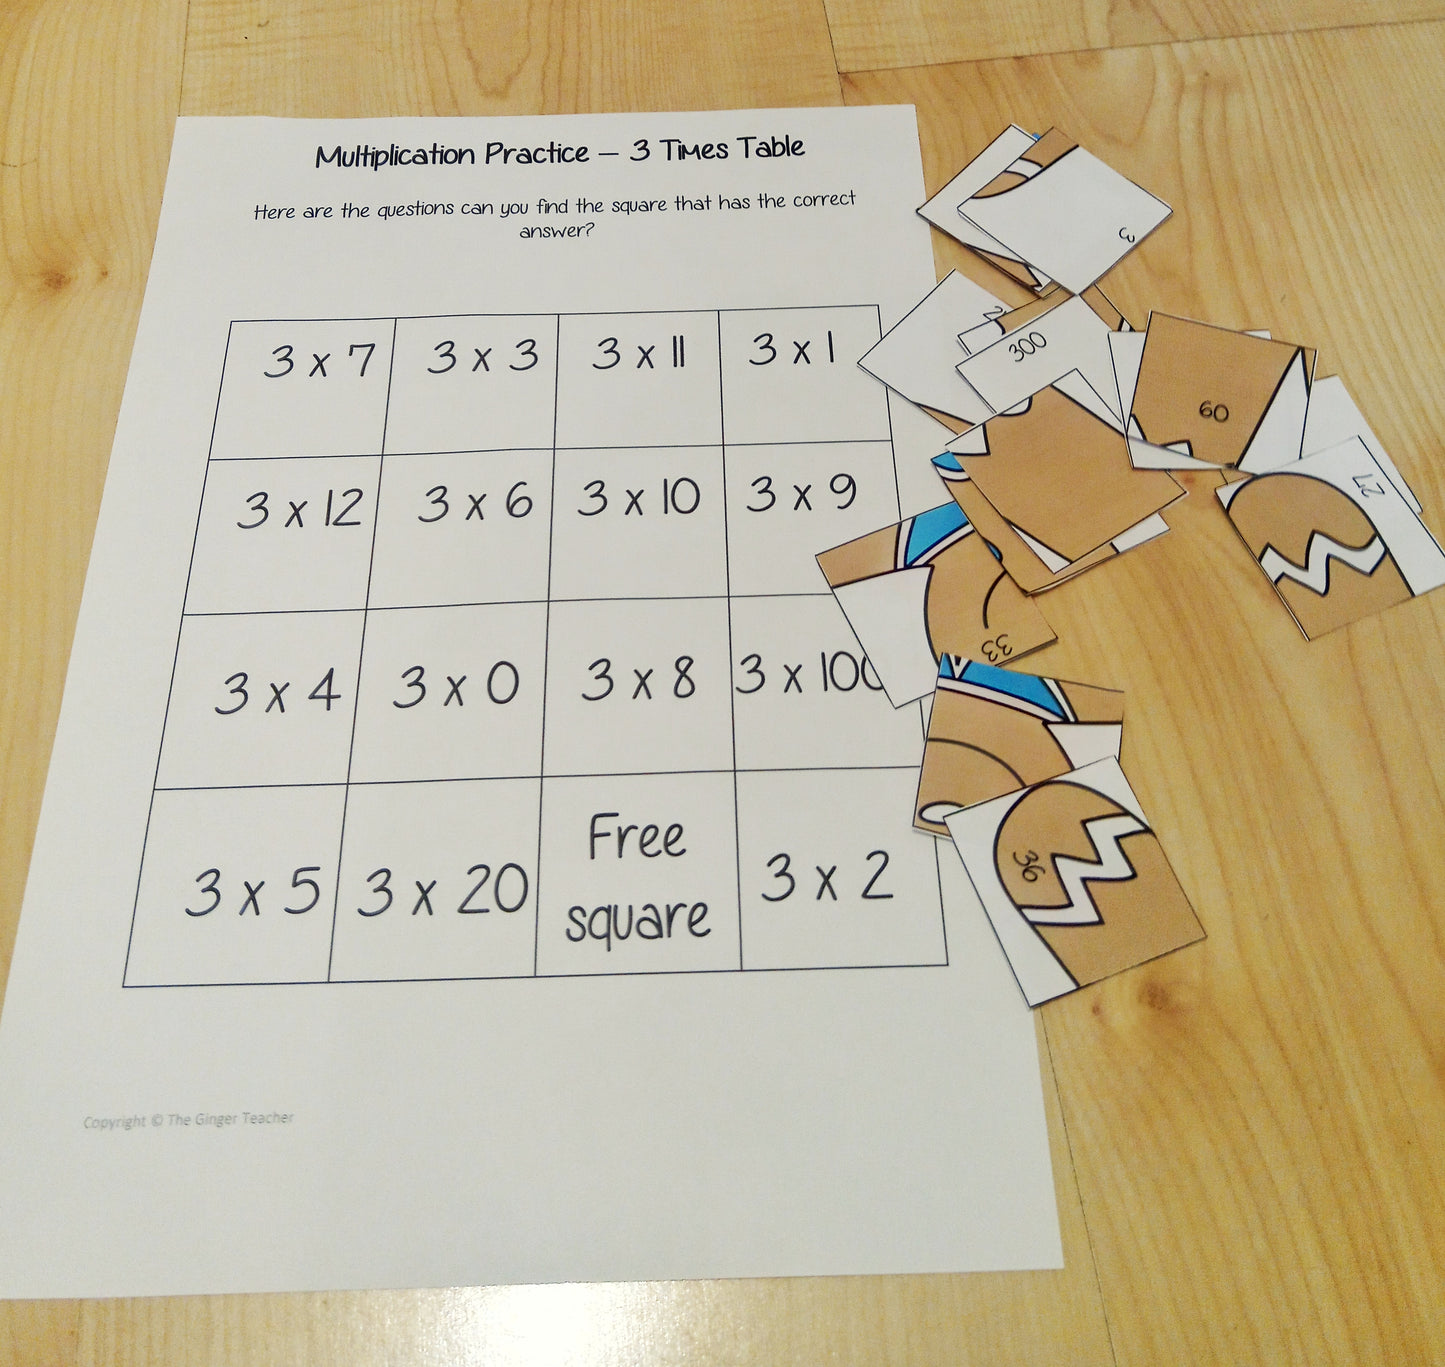 Christmas Themed Independent Multiplication Revision Sheets 3x No Prep independent revision activity for the three times tables. Children have to cut out and stick the correct answer to the question square, when the correct squares are all in place a christmas themed picture will be revealed. #teachmultiplication #revisemultiplication #threetimestables #noprep #mathsworksheets